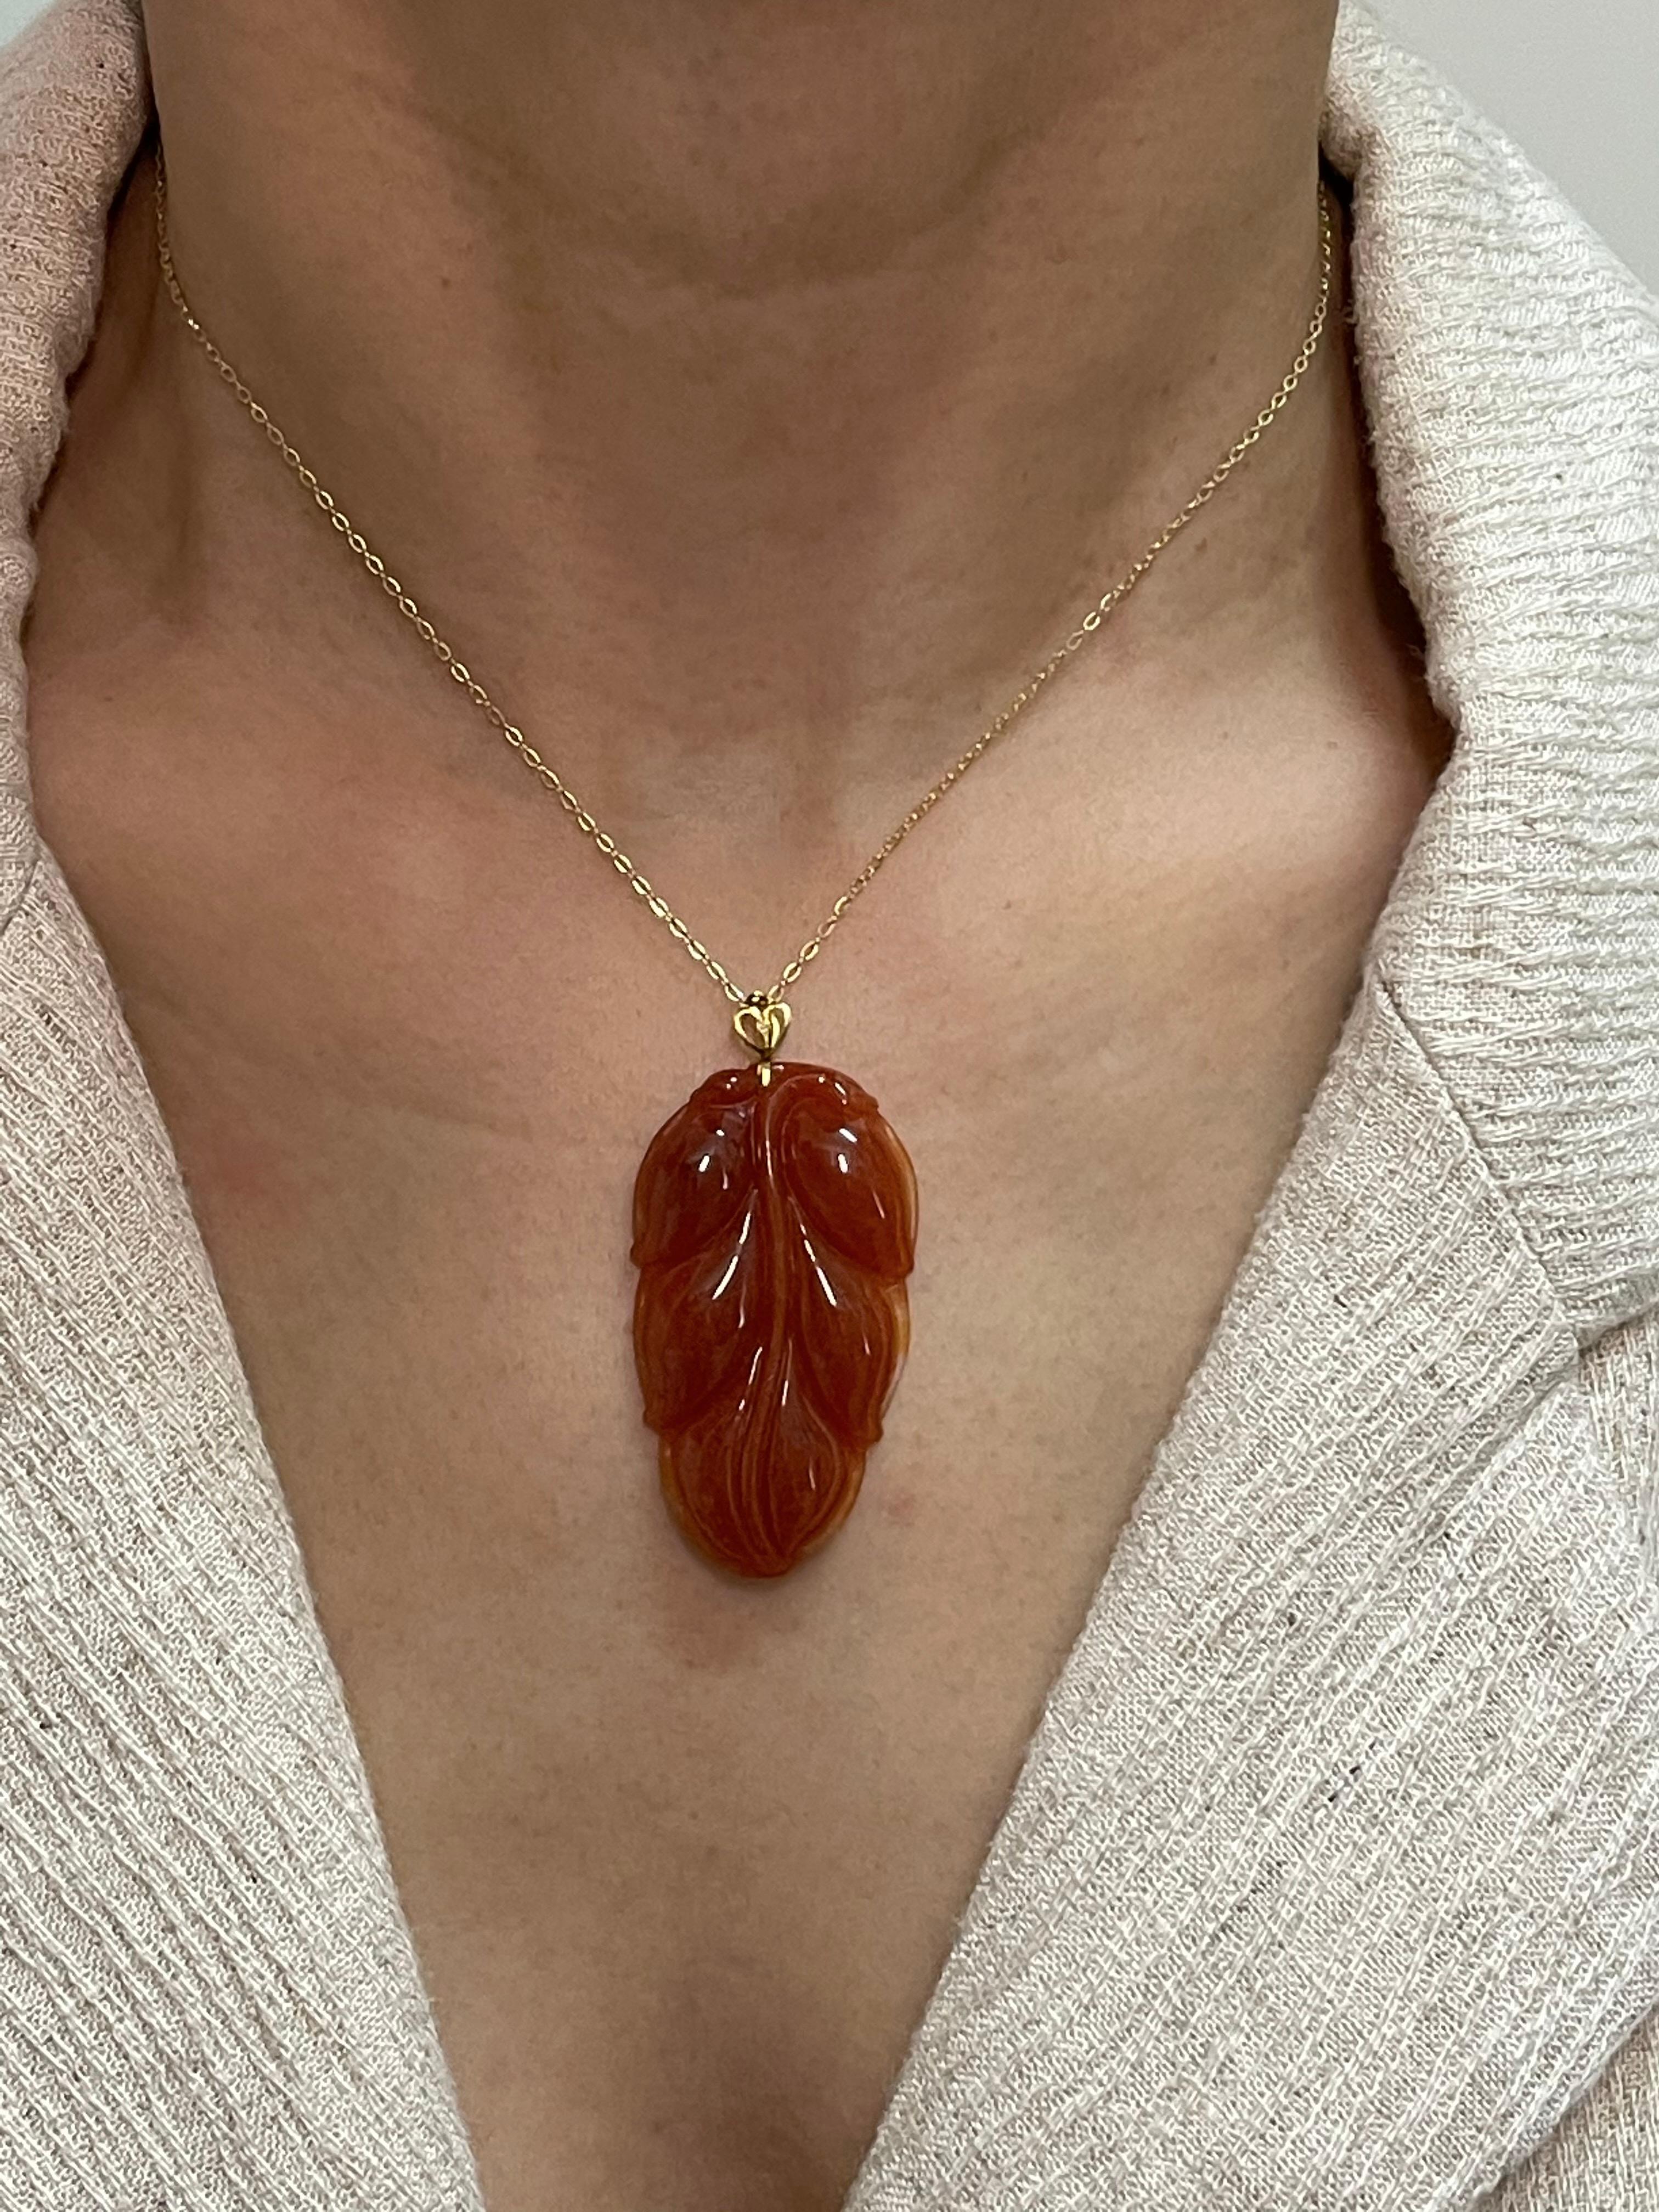 Please check out the HD video! This pendant is certified to be natural jadeite jade. The pendant is set in 18k yellow gold and one small diamond. In the trade we call it red jade but in reality it is more brown in color than red. The meaning behind